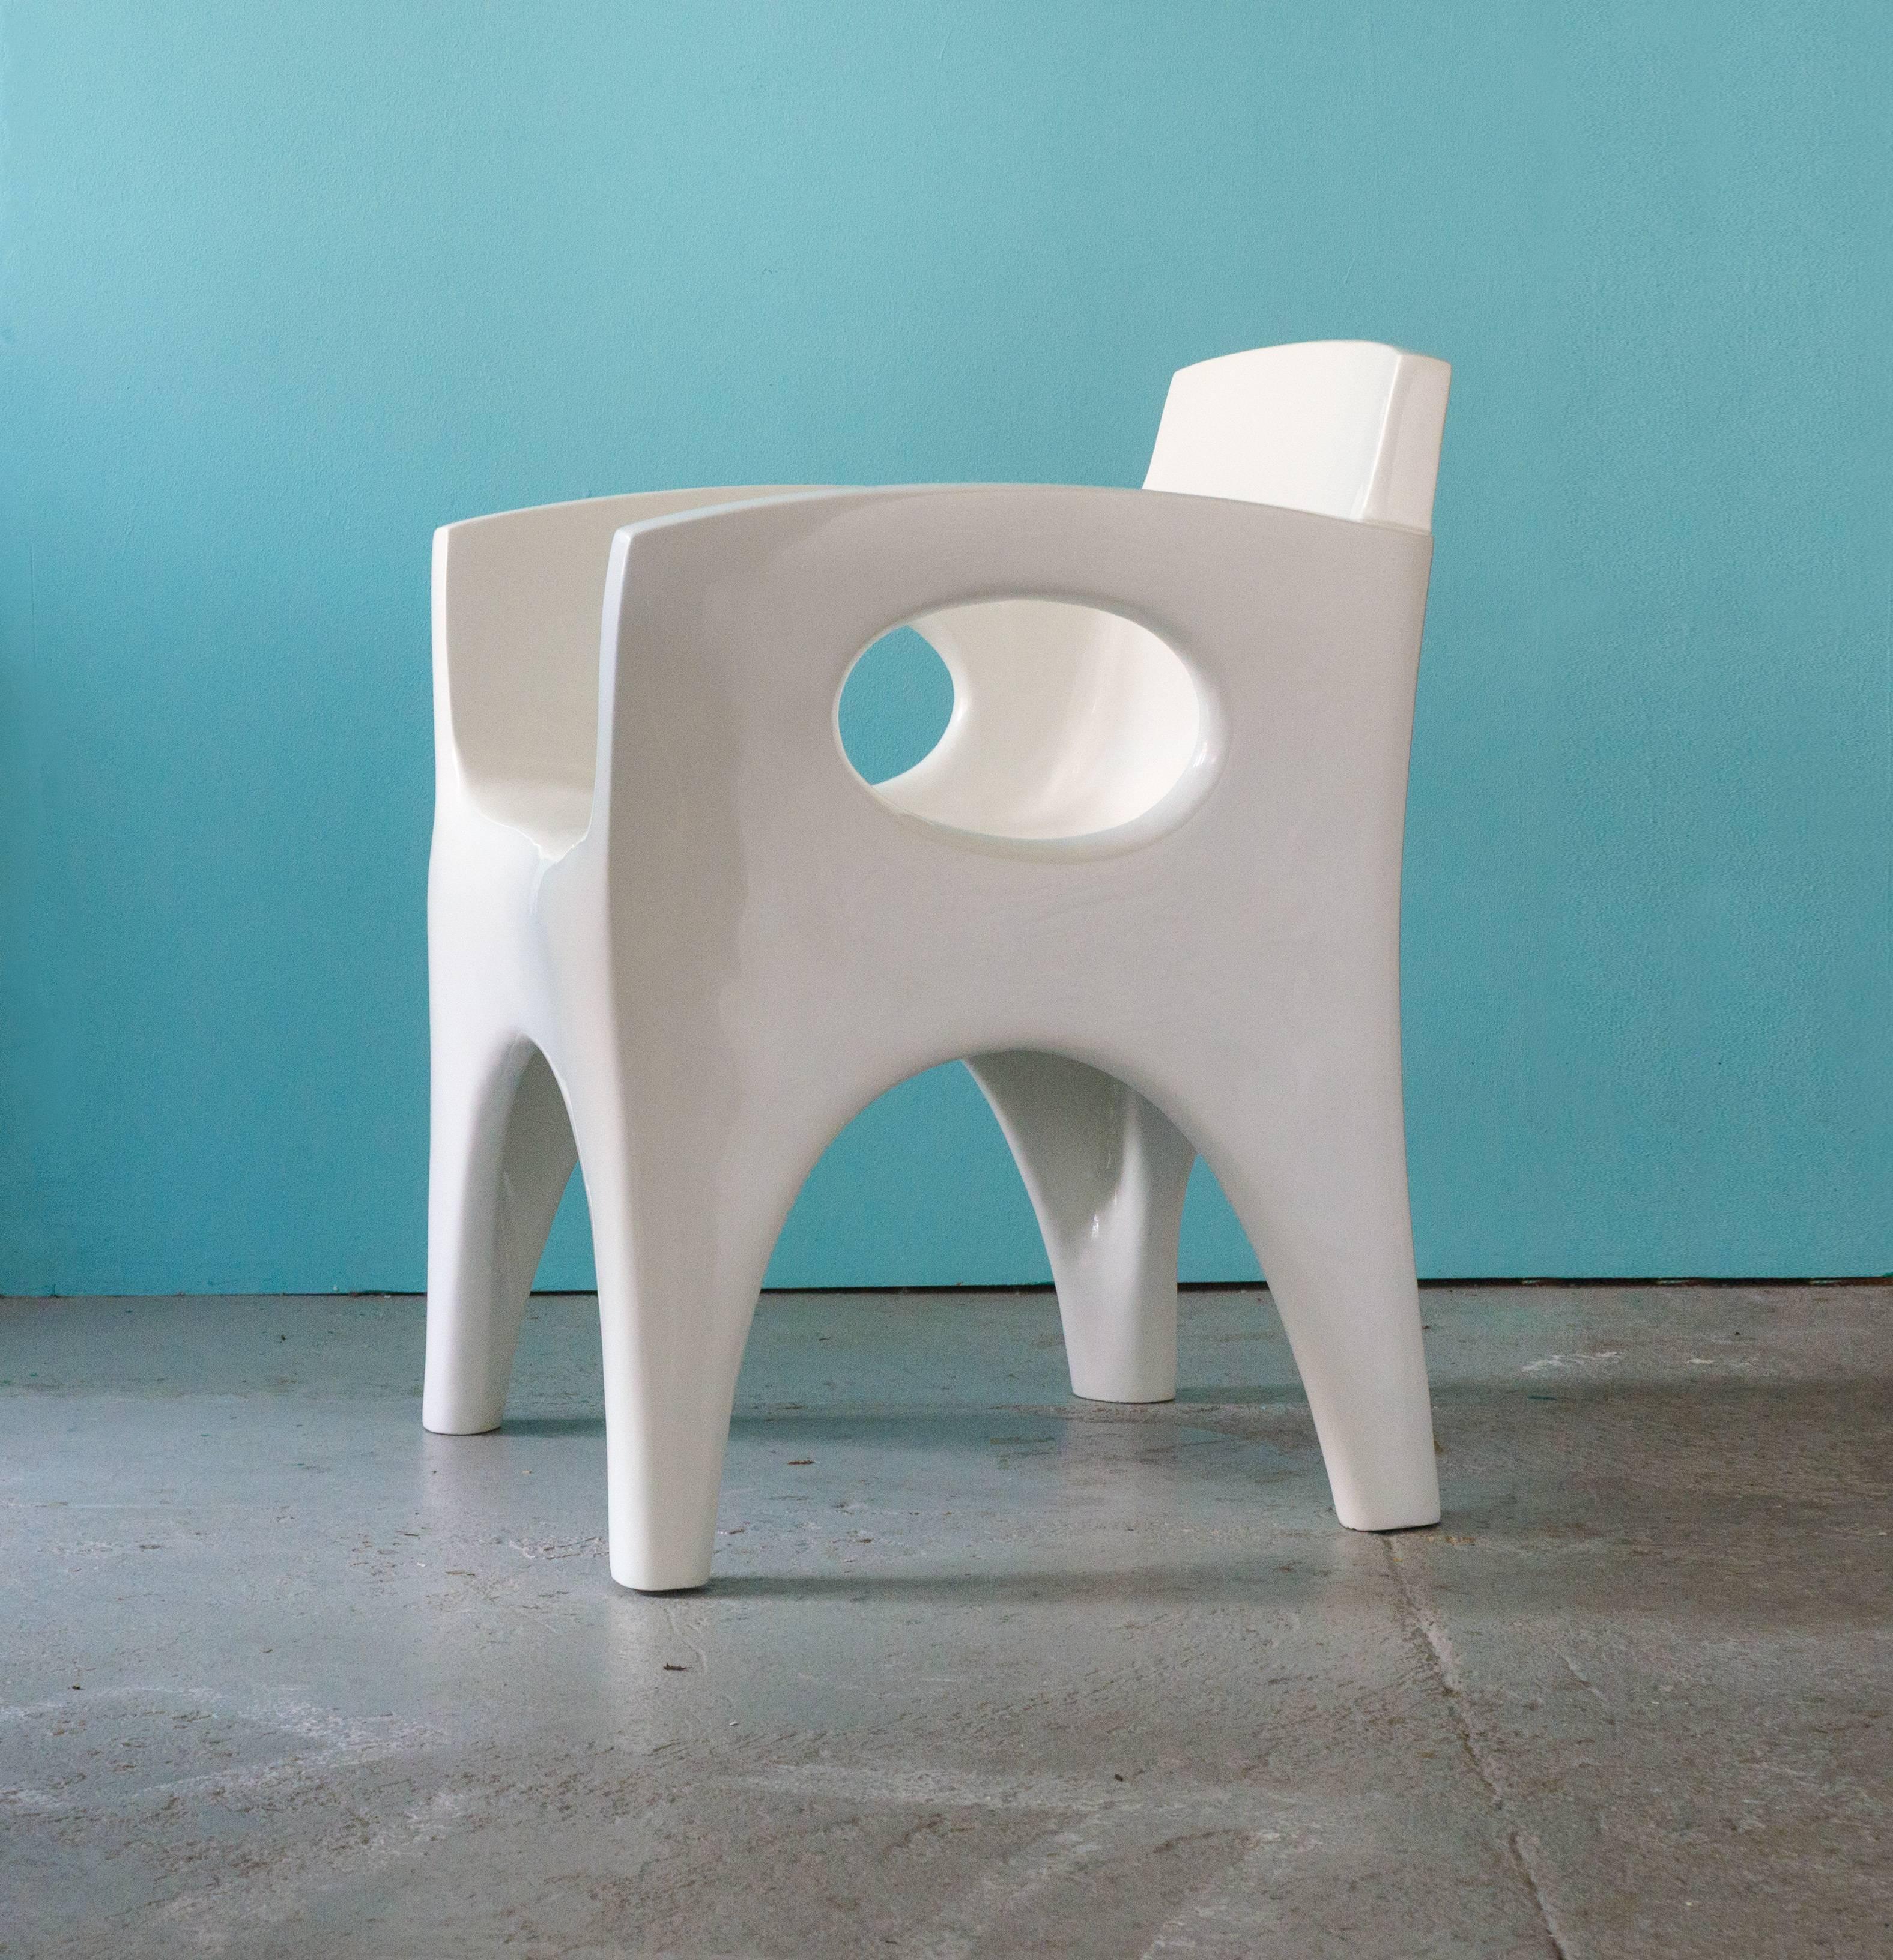 Sculpted armchairs that carry the imprint of Jarrige's joyous exploration of voids and solids.